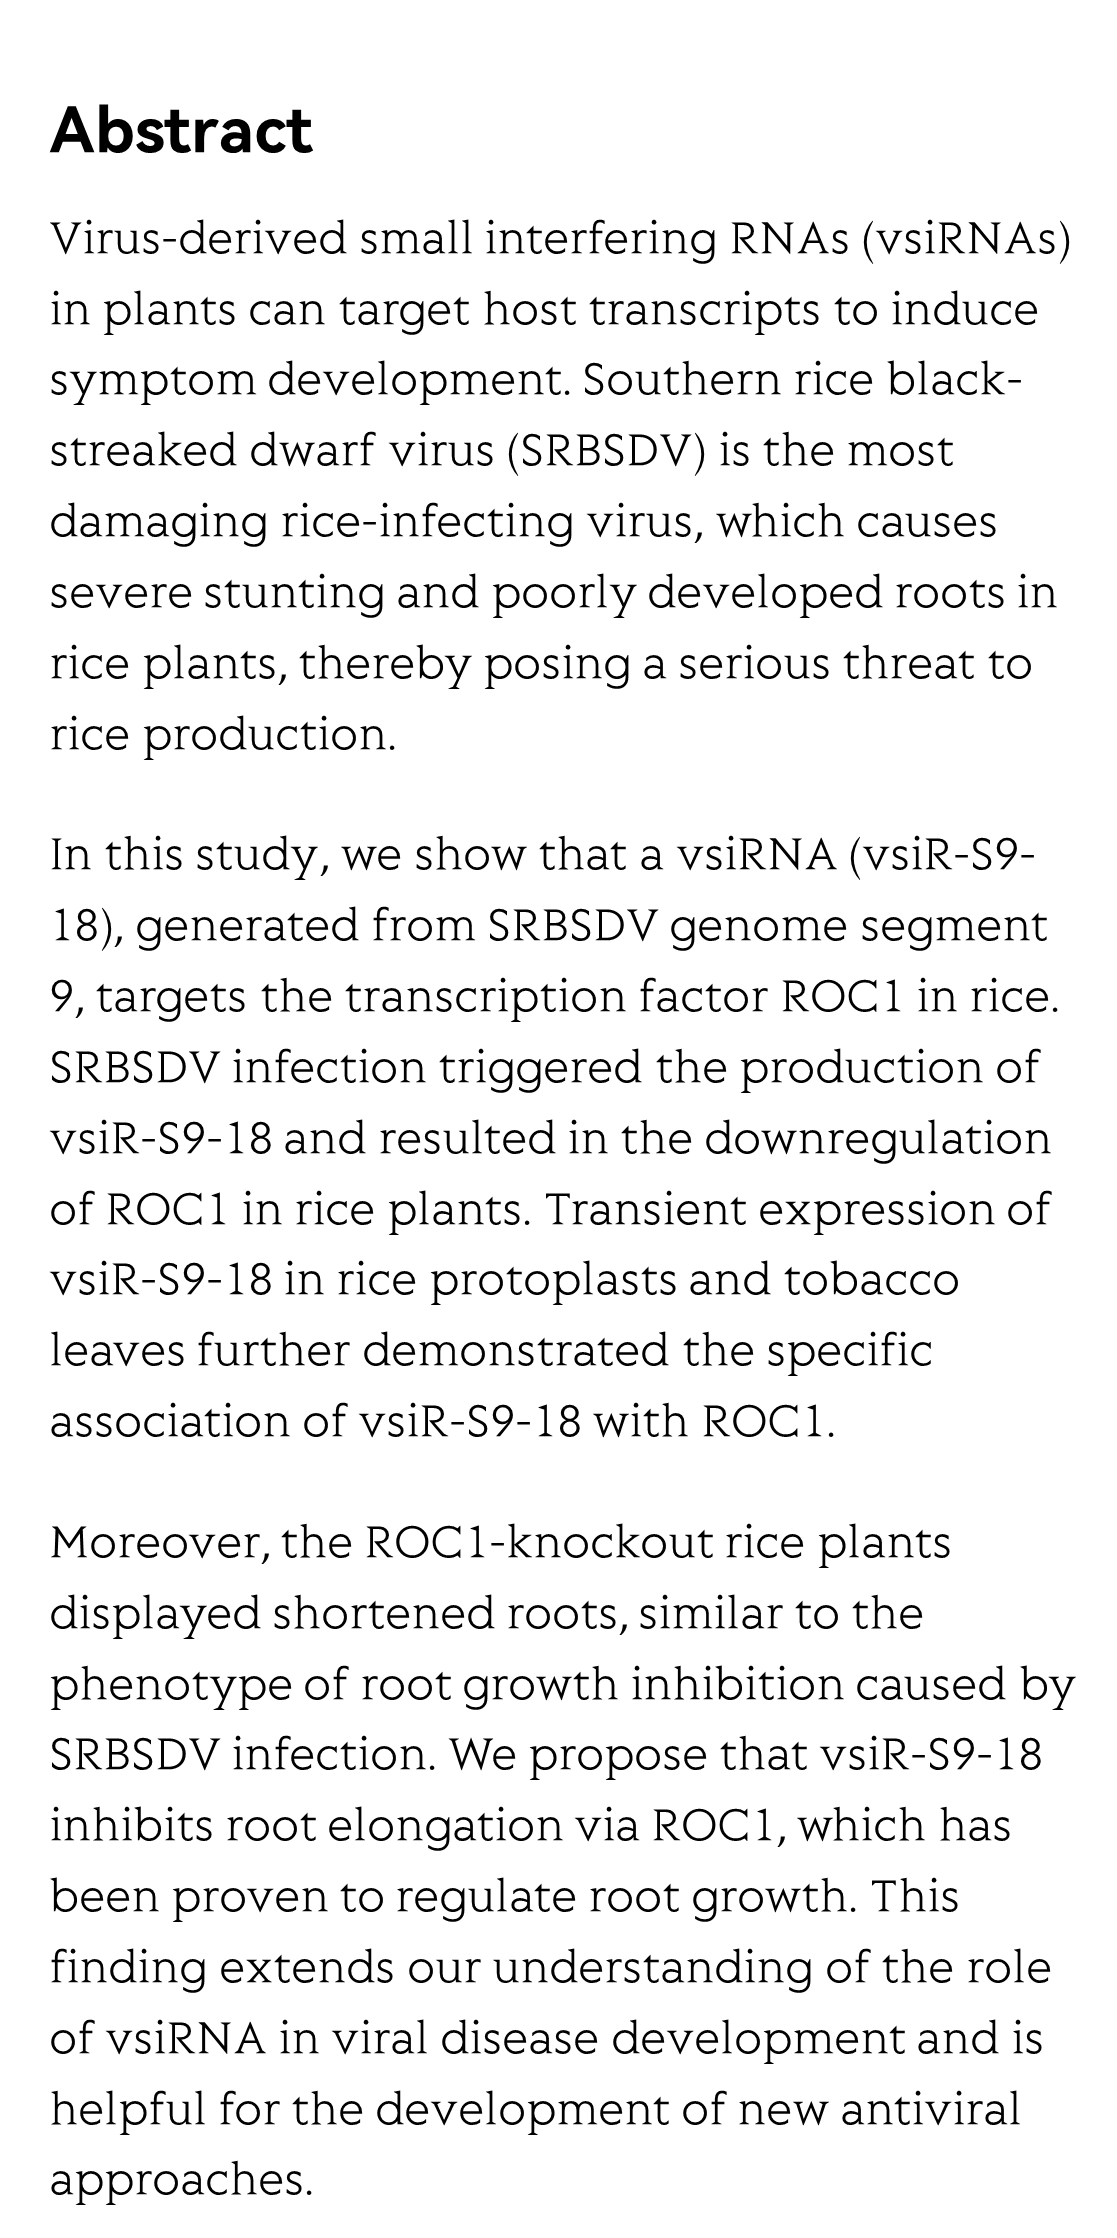 A virus-derived small RNA targets the rice transcription factor ROC1 to induce disease-like symptom_2